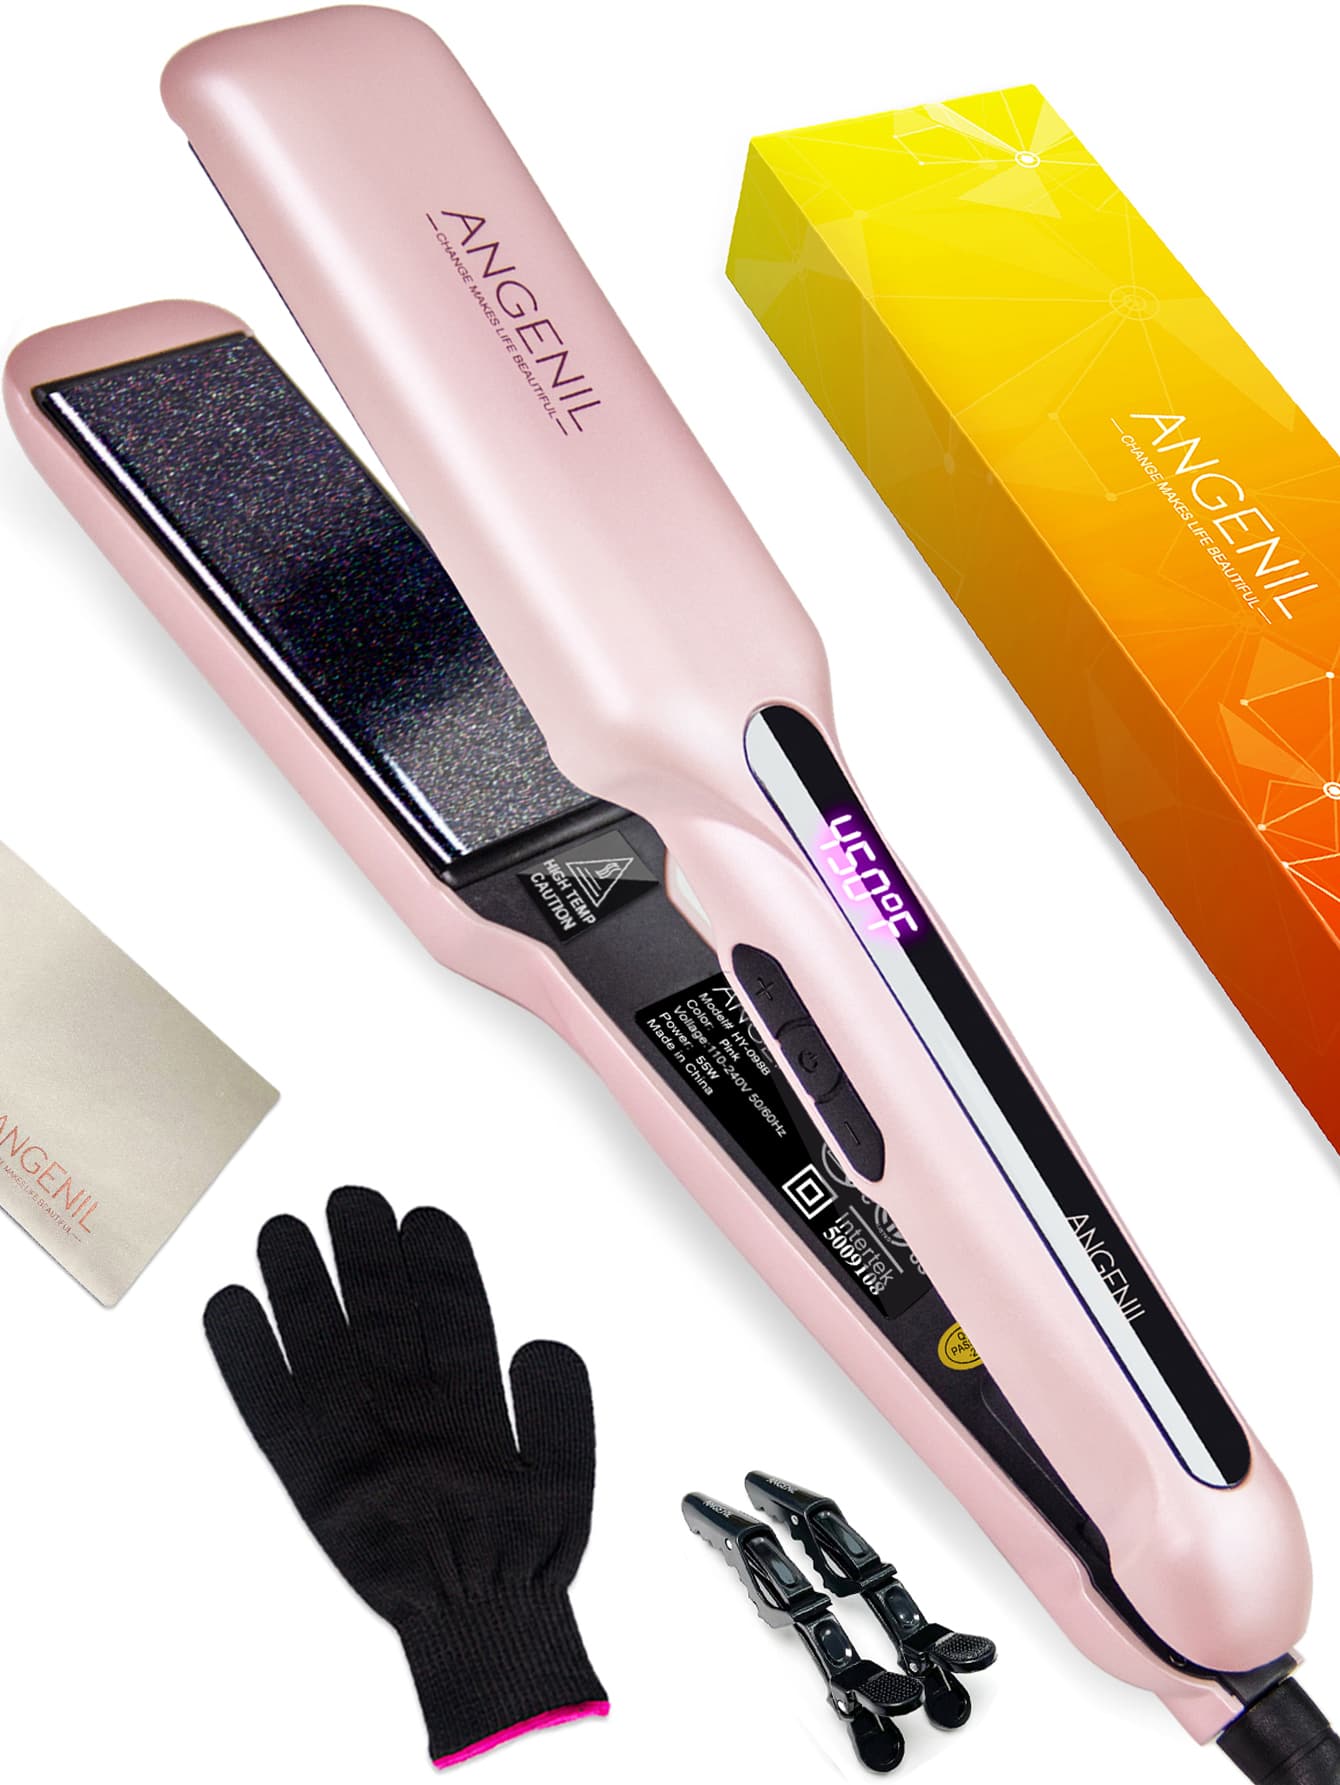 (US)ANGENIL Argan Oil Flat Iron Curling Iron in One, Professional Portable Dual Voltage Ceramic Hair Straightener, 1.6 Inch Wide Flat Iron for Thick Hair, Fast Straightening Styling, LCD Display-Pink-1